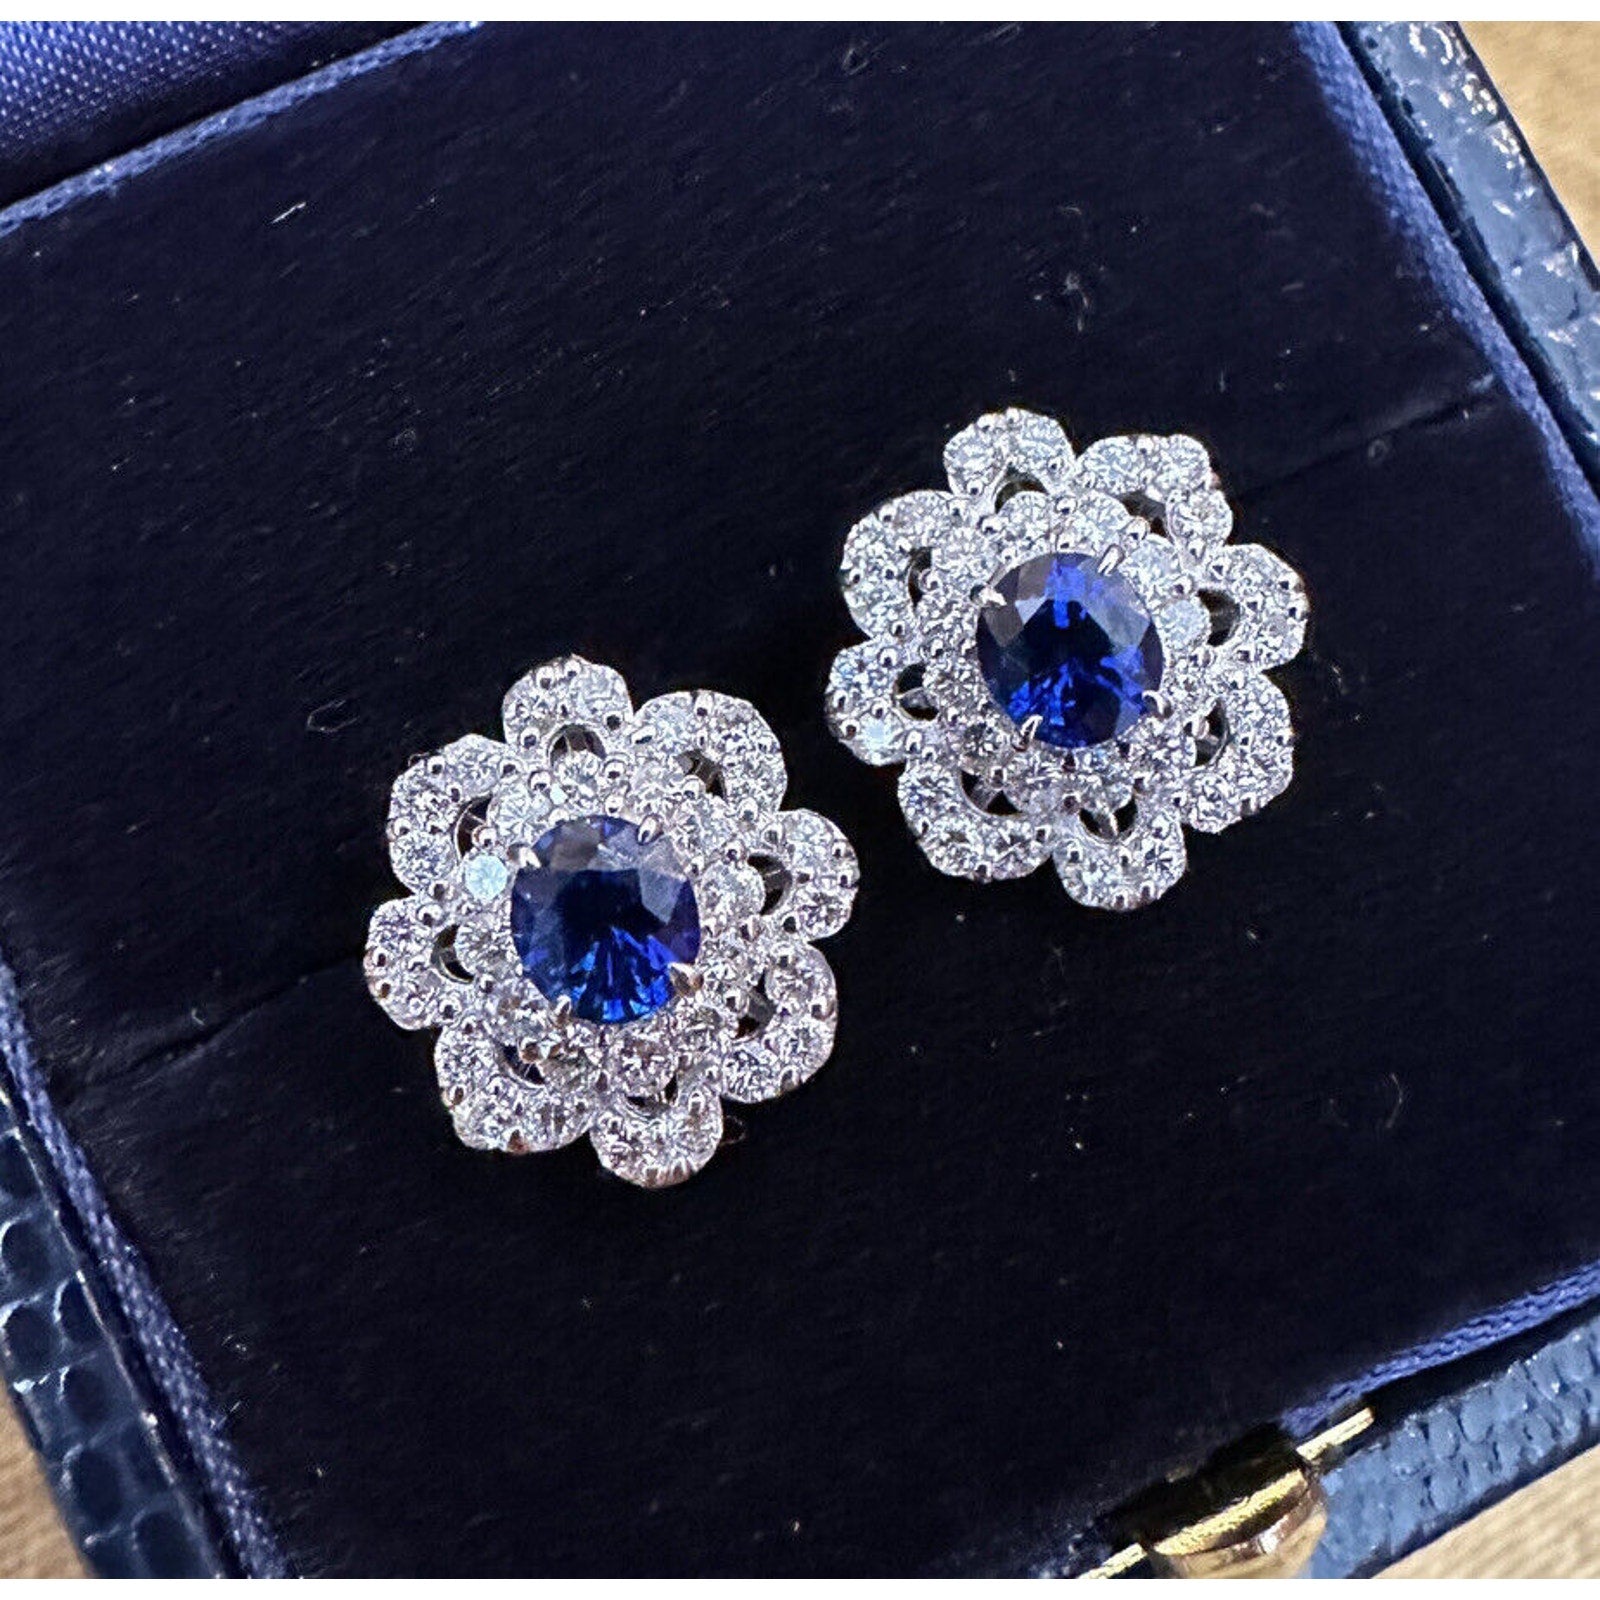 Scalloped Edge Halo Diamond and Sapphire Earrings in Platinum